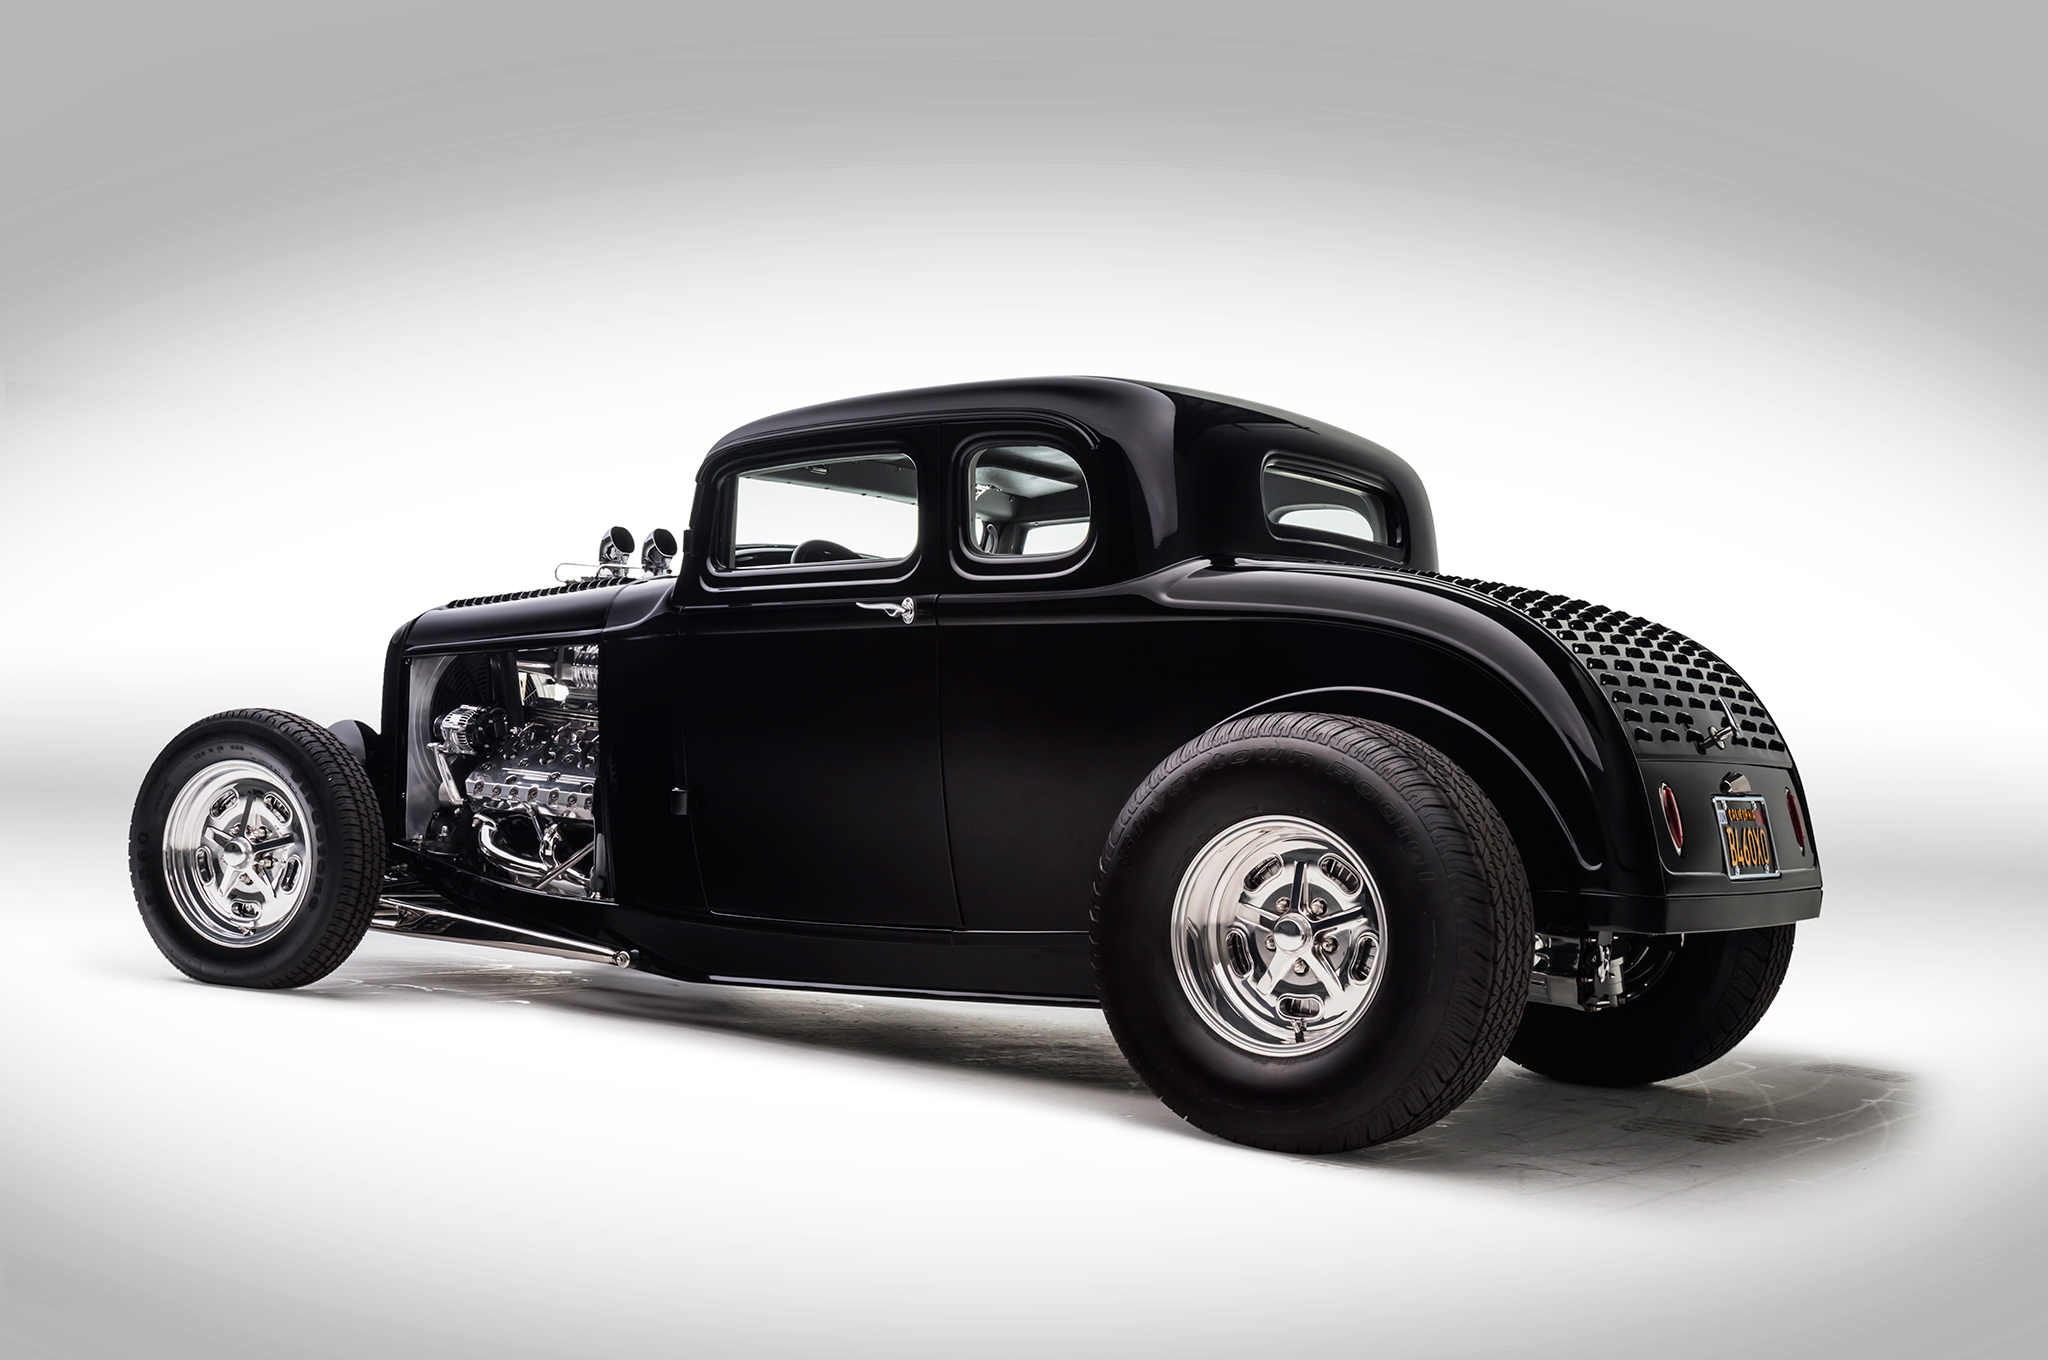 1932 Ford Coupe Hd Wallpaper Background Image 2048x1360